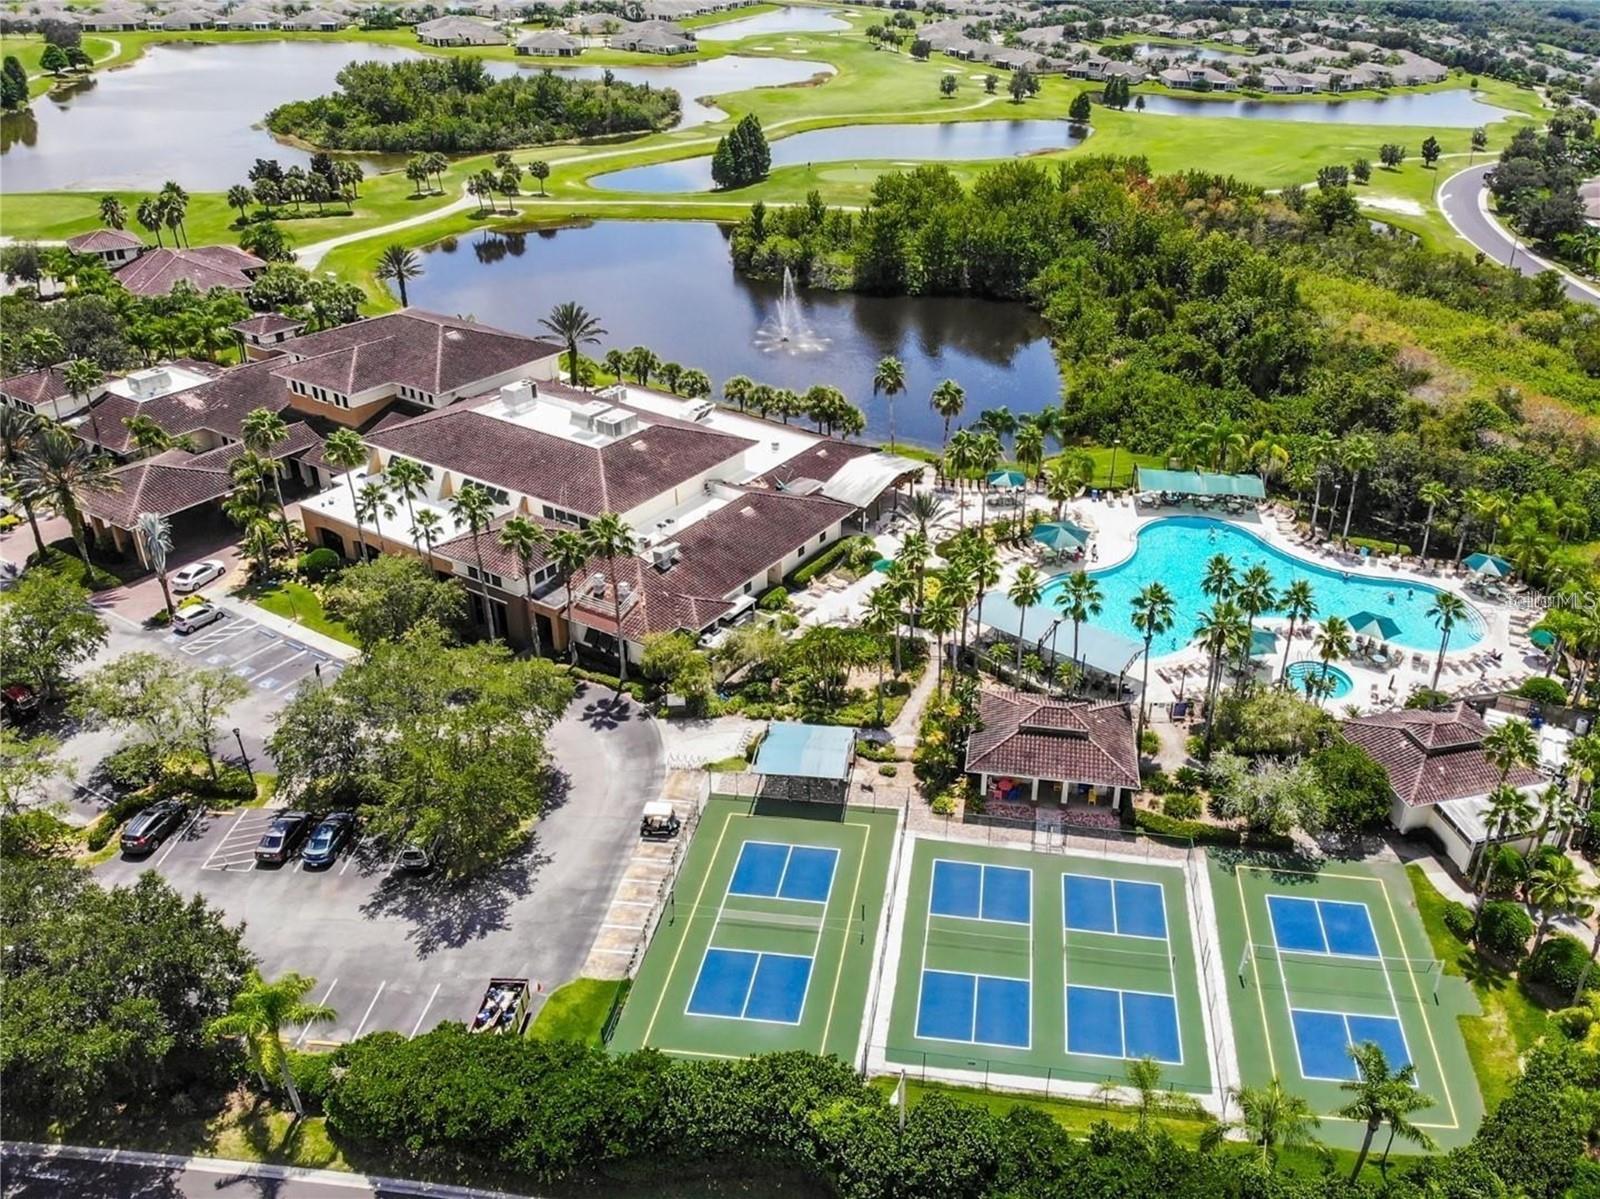 Tennis court, Pickle ball court, outdoor pool